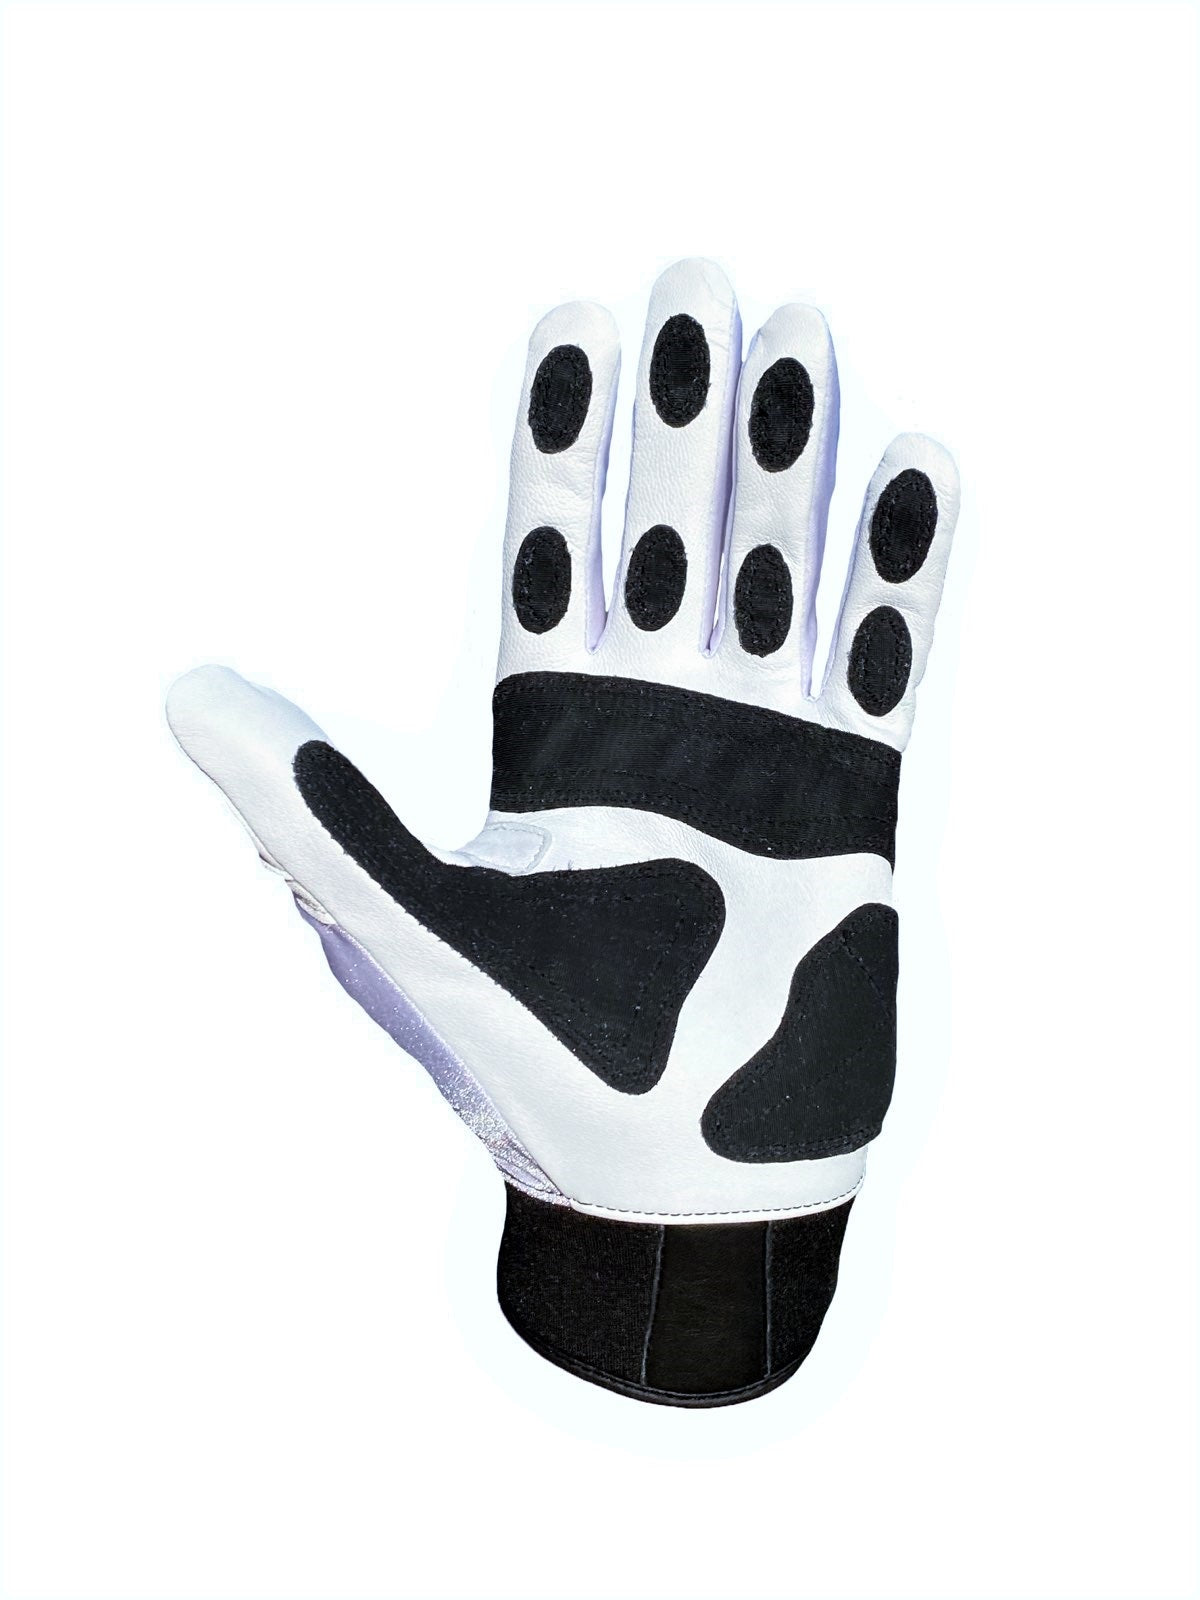 Palm view of VukGripz Alpha 2.0 Navy Batting Gloves featuring black grip material on white glove